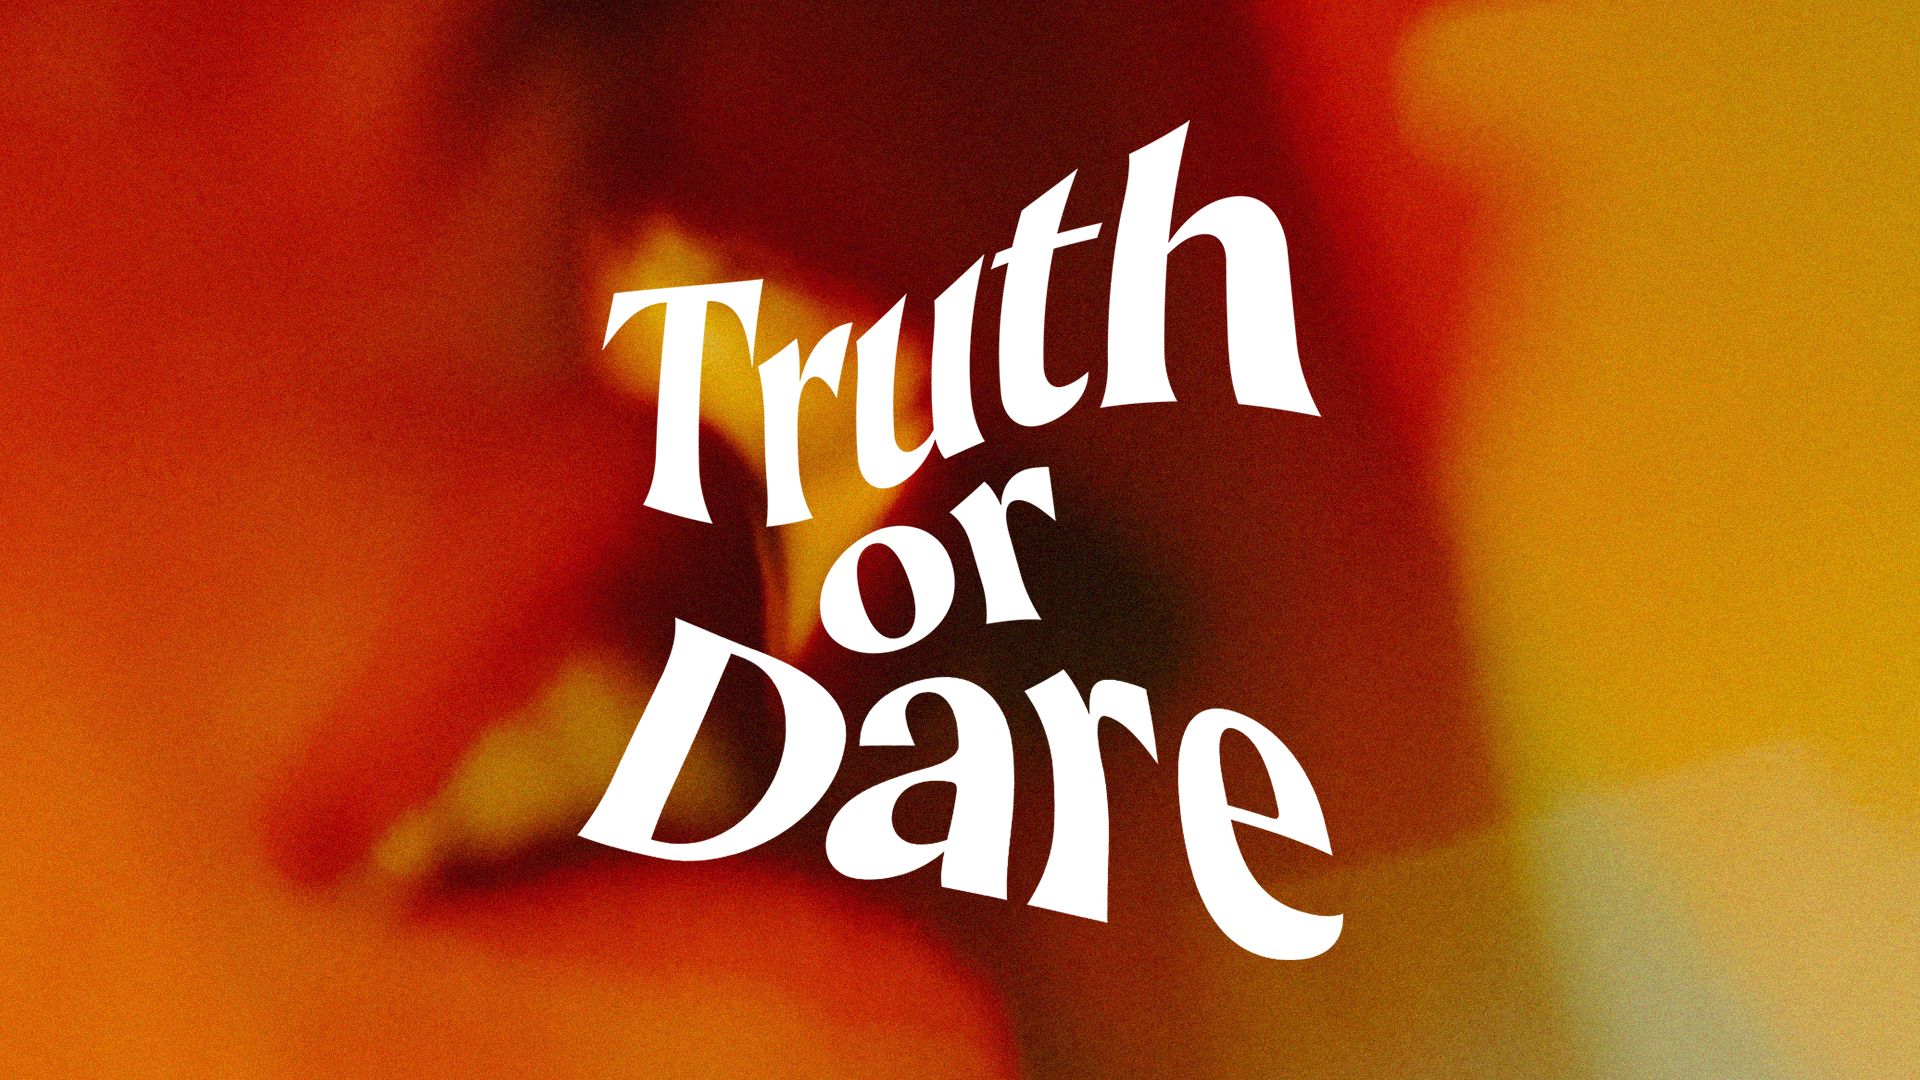 alexis rey recommends Truth And Dare Stories